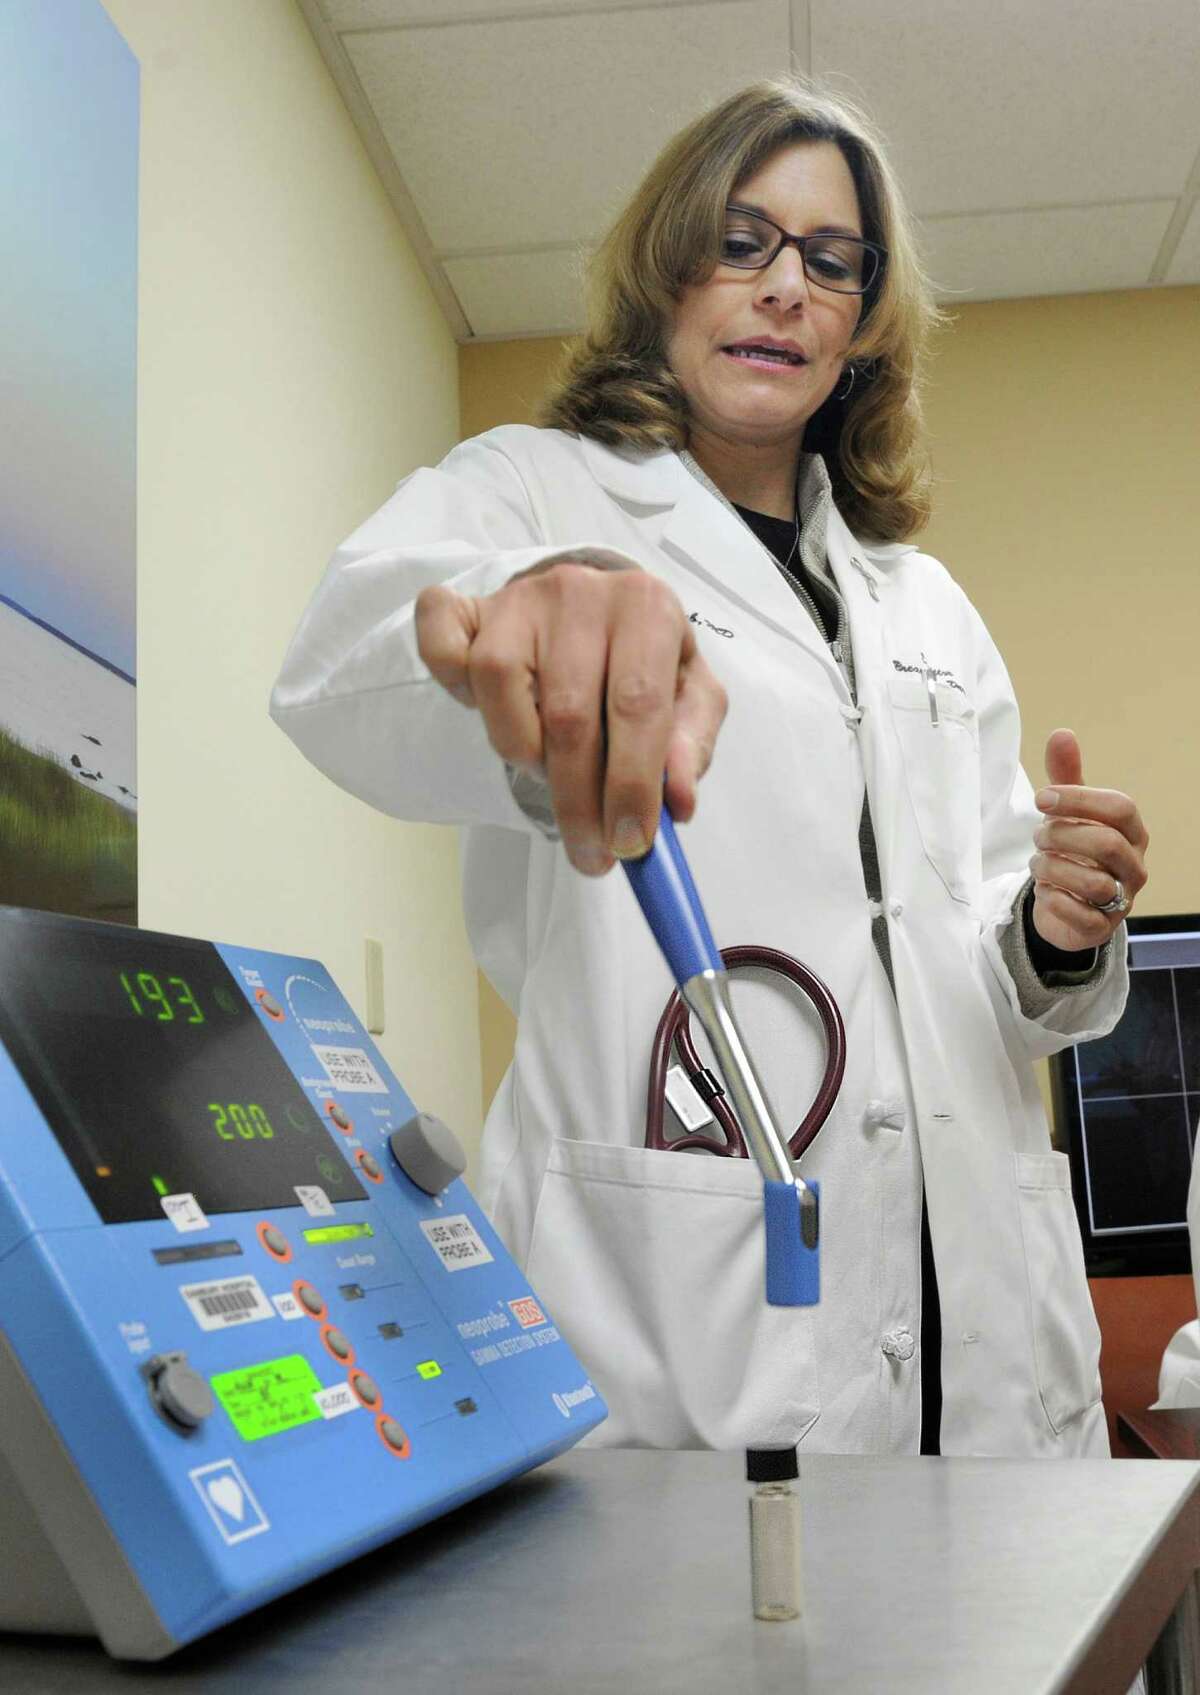 Dr. Valerie Staradub explains a technology that uses radioactive seed localization to remove spots on a woman's breast, Tuesday, Nov. 24, 2014 at Danbury Hospital. Western Connecticut Health Network is the first provider in the state of Connecticut to offer this new technology to accurately locate spots that cannot be felt.